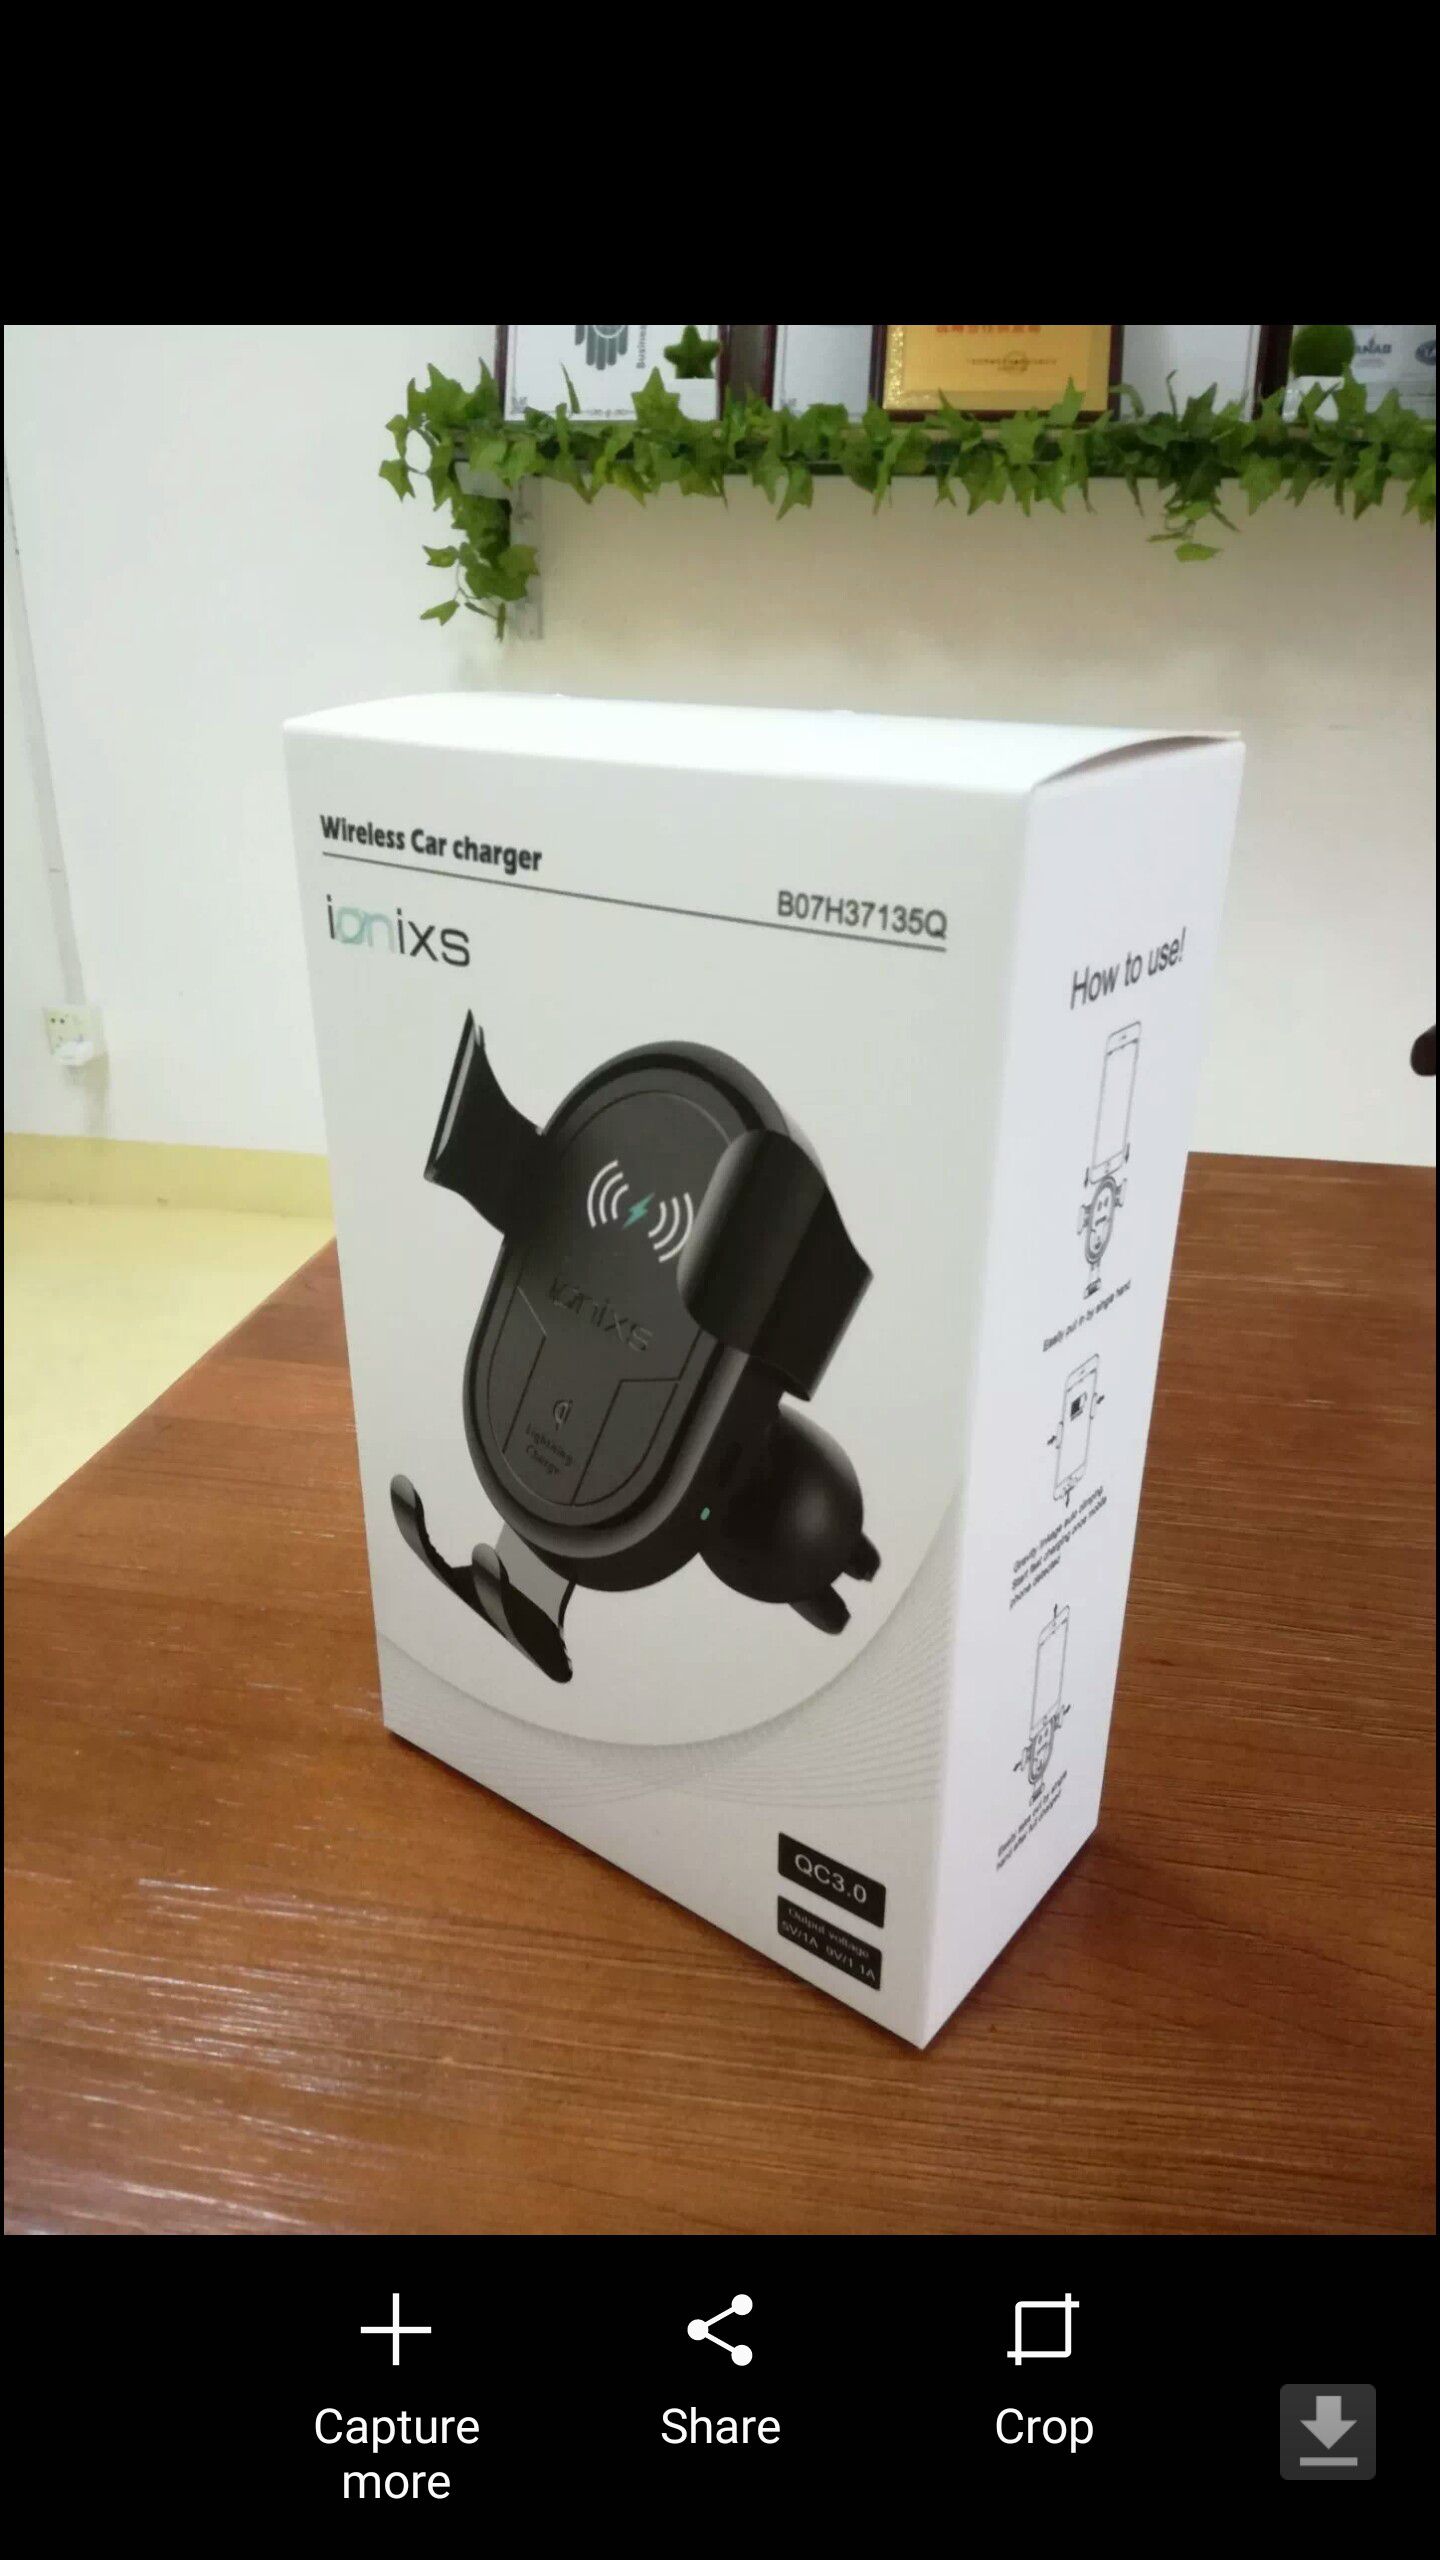 Wireless Car Charger - Brand new / open box